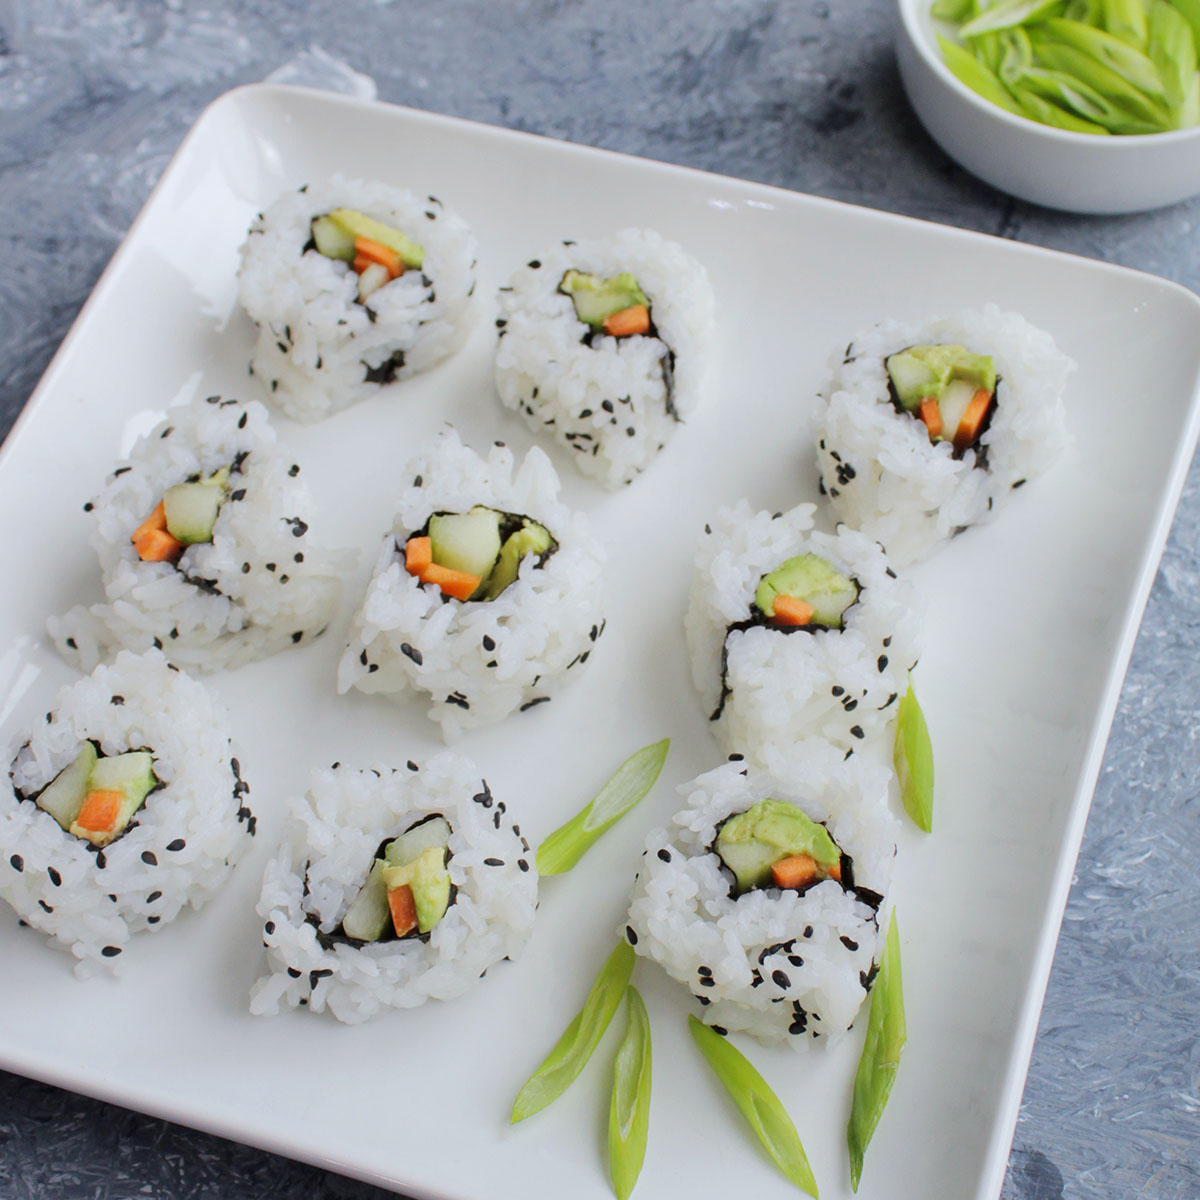 How to Make Homemade Sushi: Step by Step Instructions - Homebody Eats